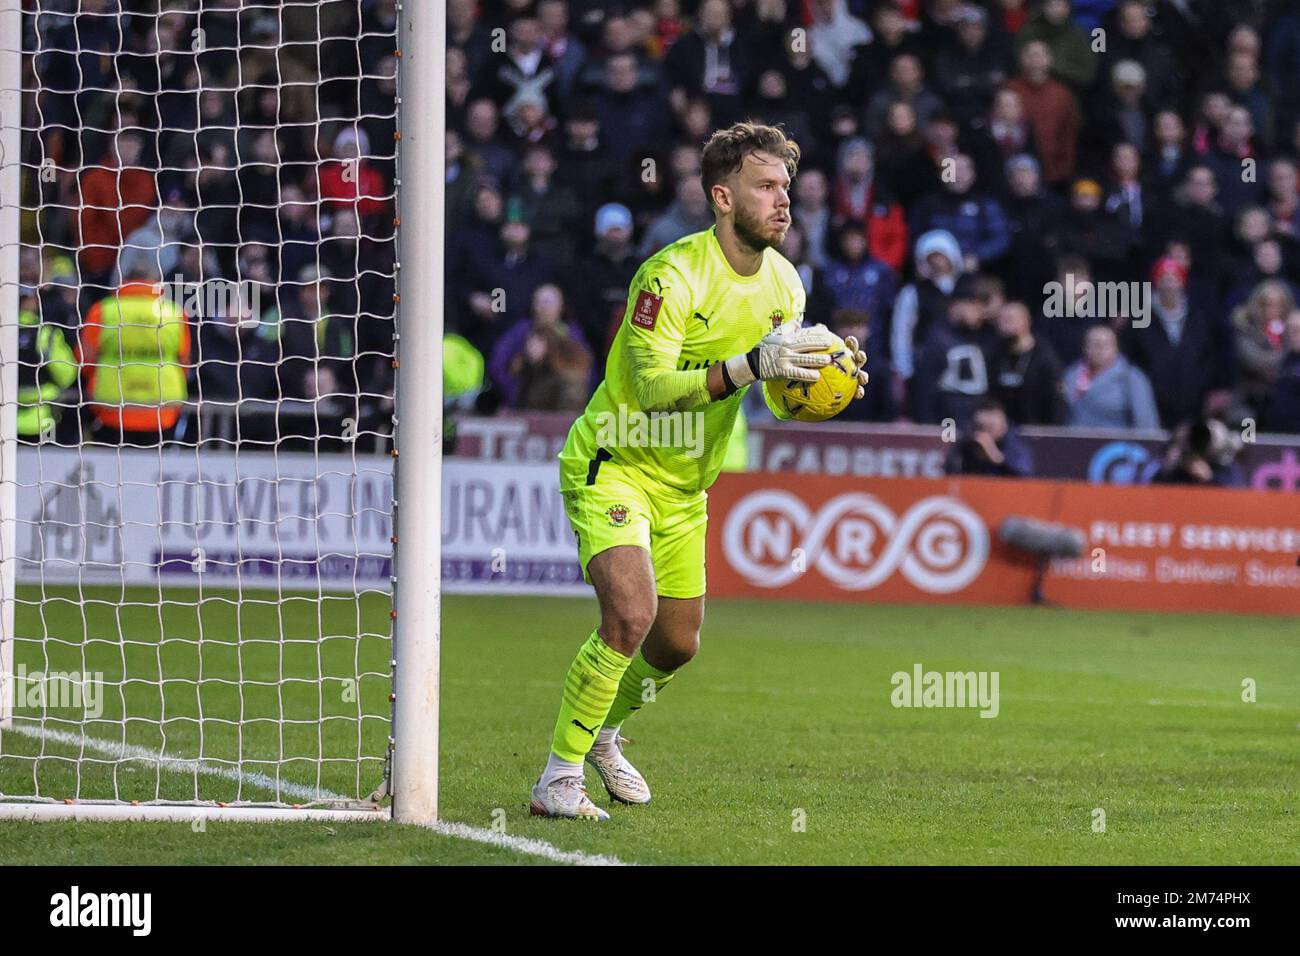 Chris Maxwell #1 of Blackpool saves a shot from Sam Surridge #16 of Nottingham Forest during the Emirates FA Cup Third Round match Blackpool vs Nottingham Forest at Bloomfield Road, Blackpool, United Kingdom, 7th January 2023  (Photo by Mark Cosgrove/News Images) Stock Photo